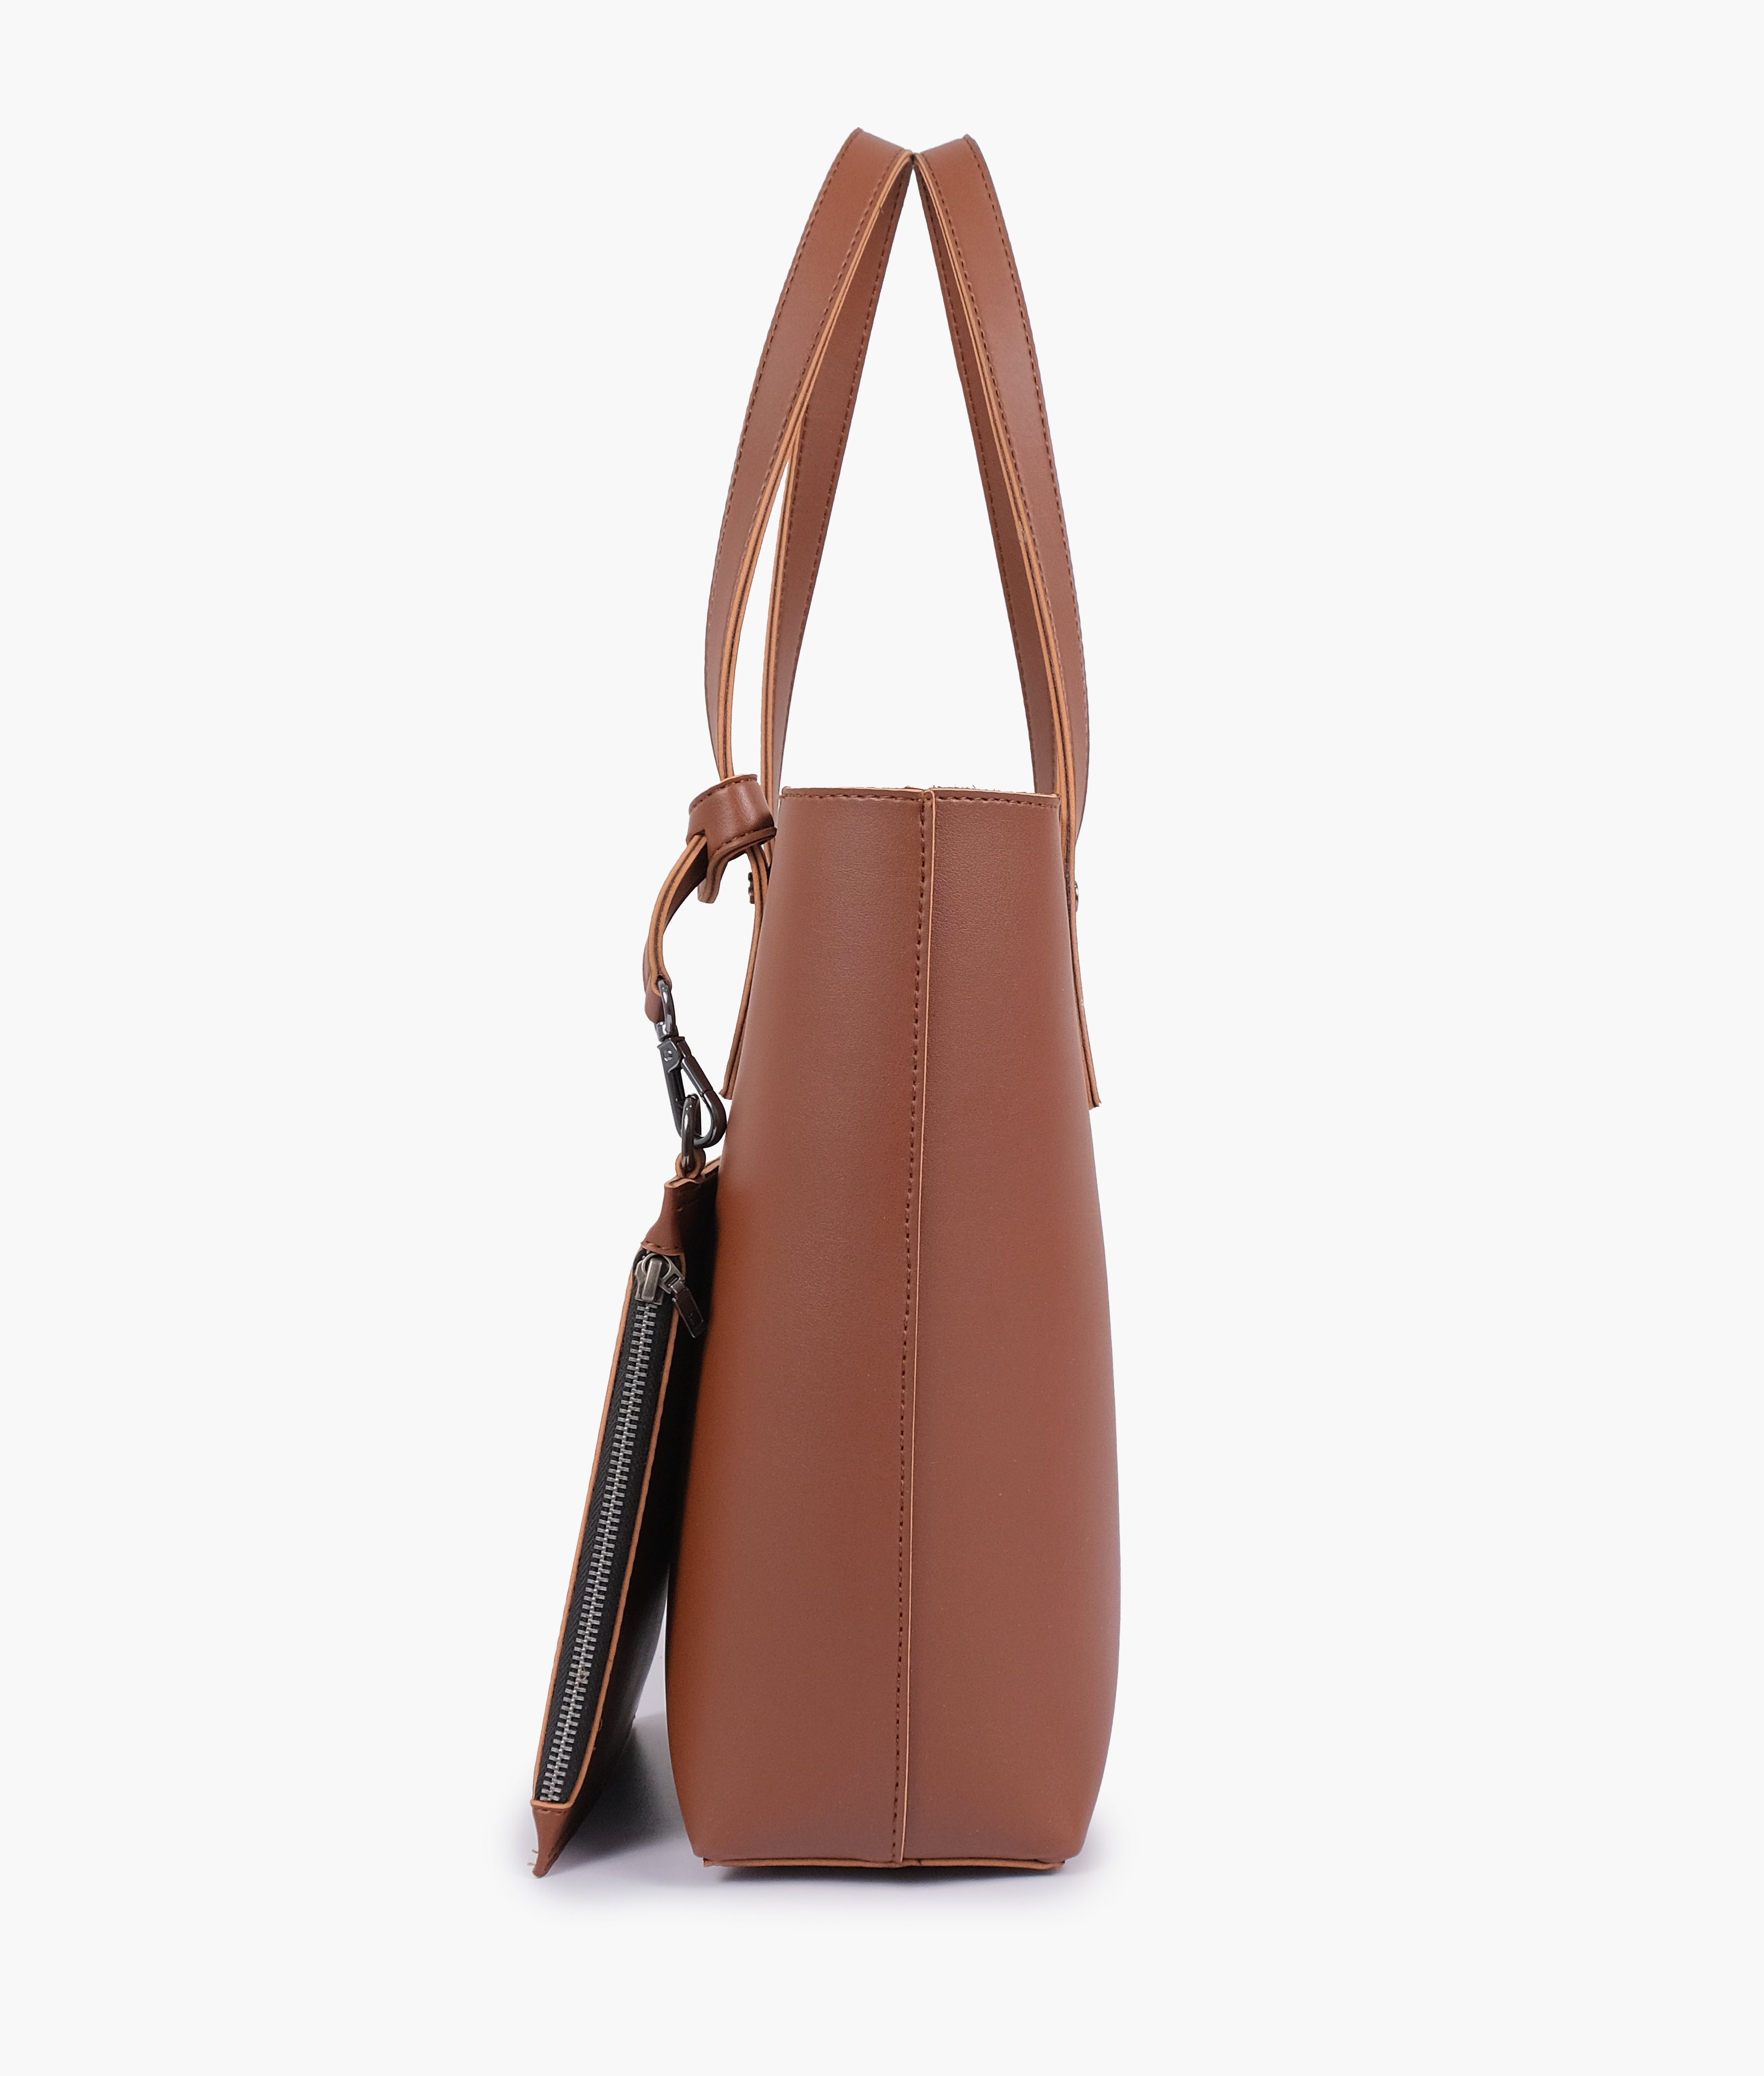 Brown tote bag with detachable pouch